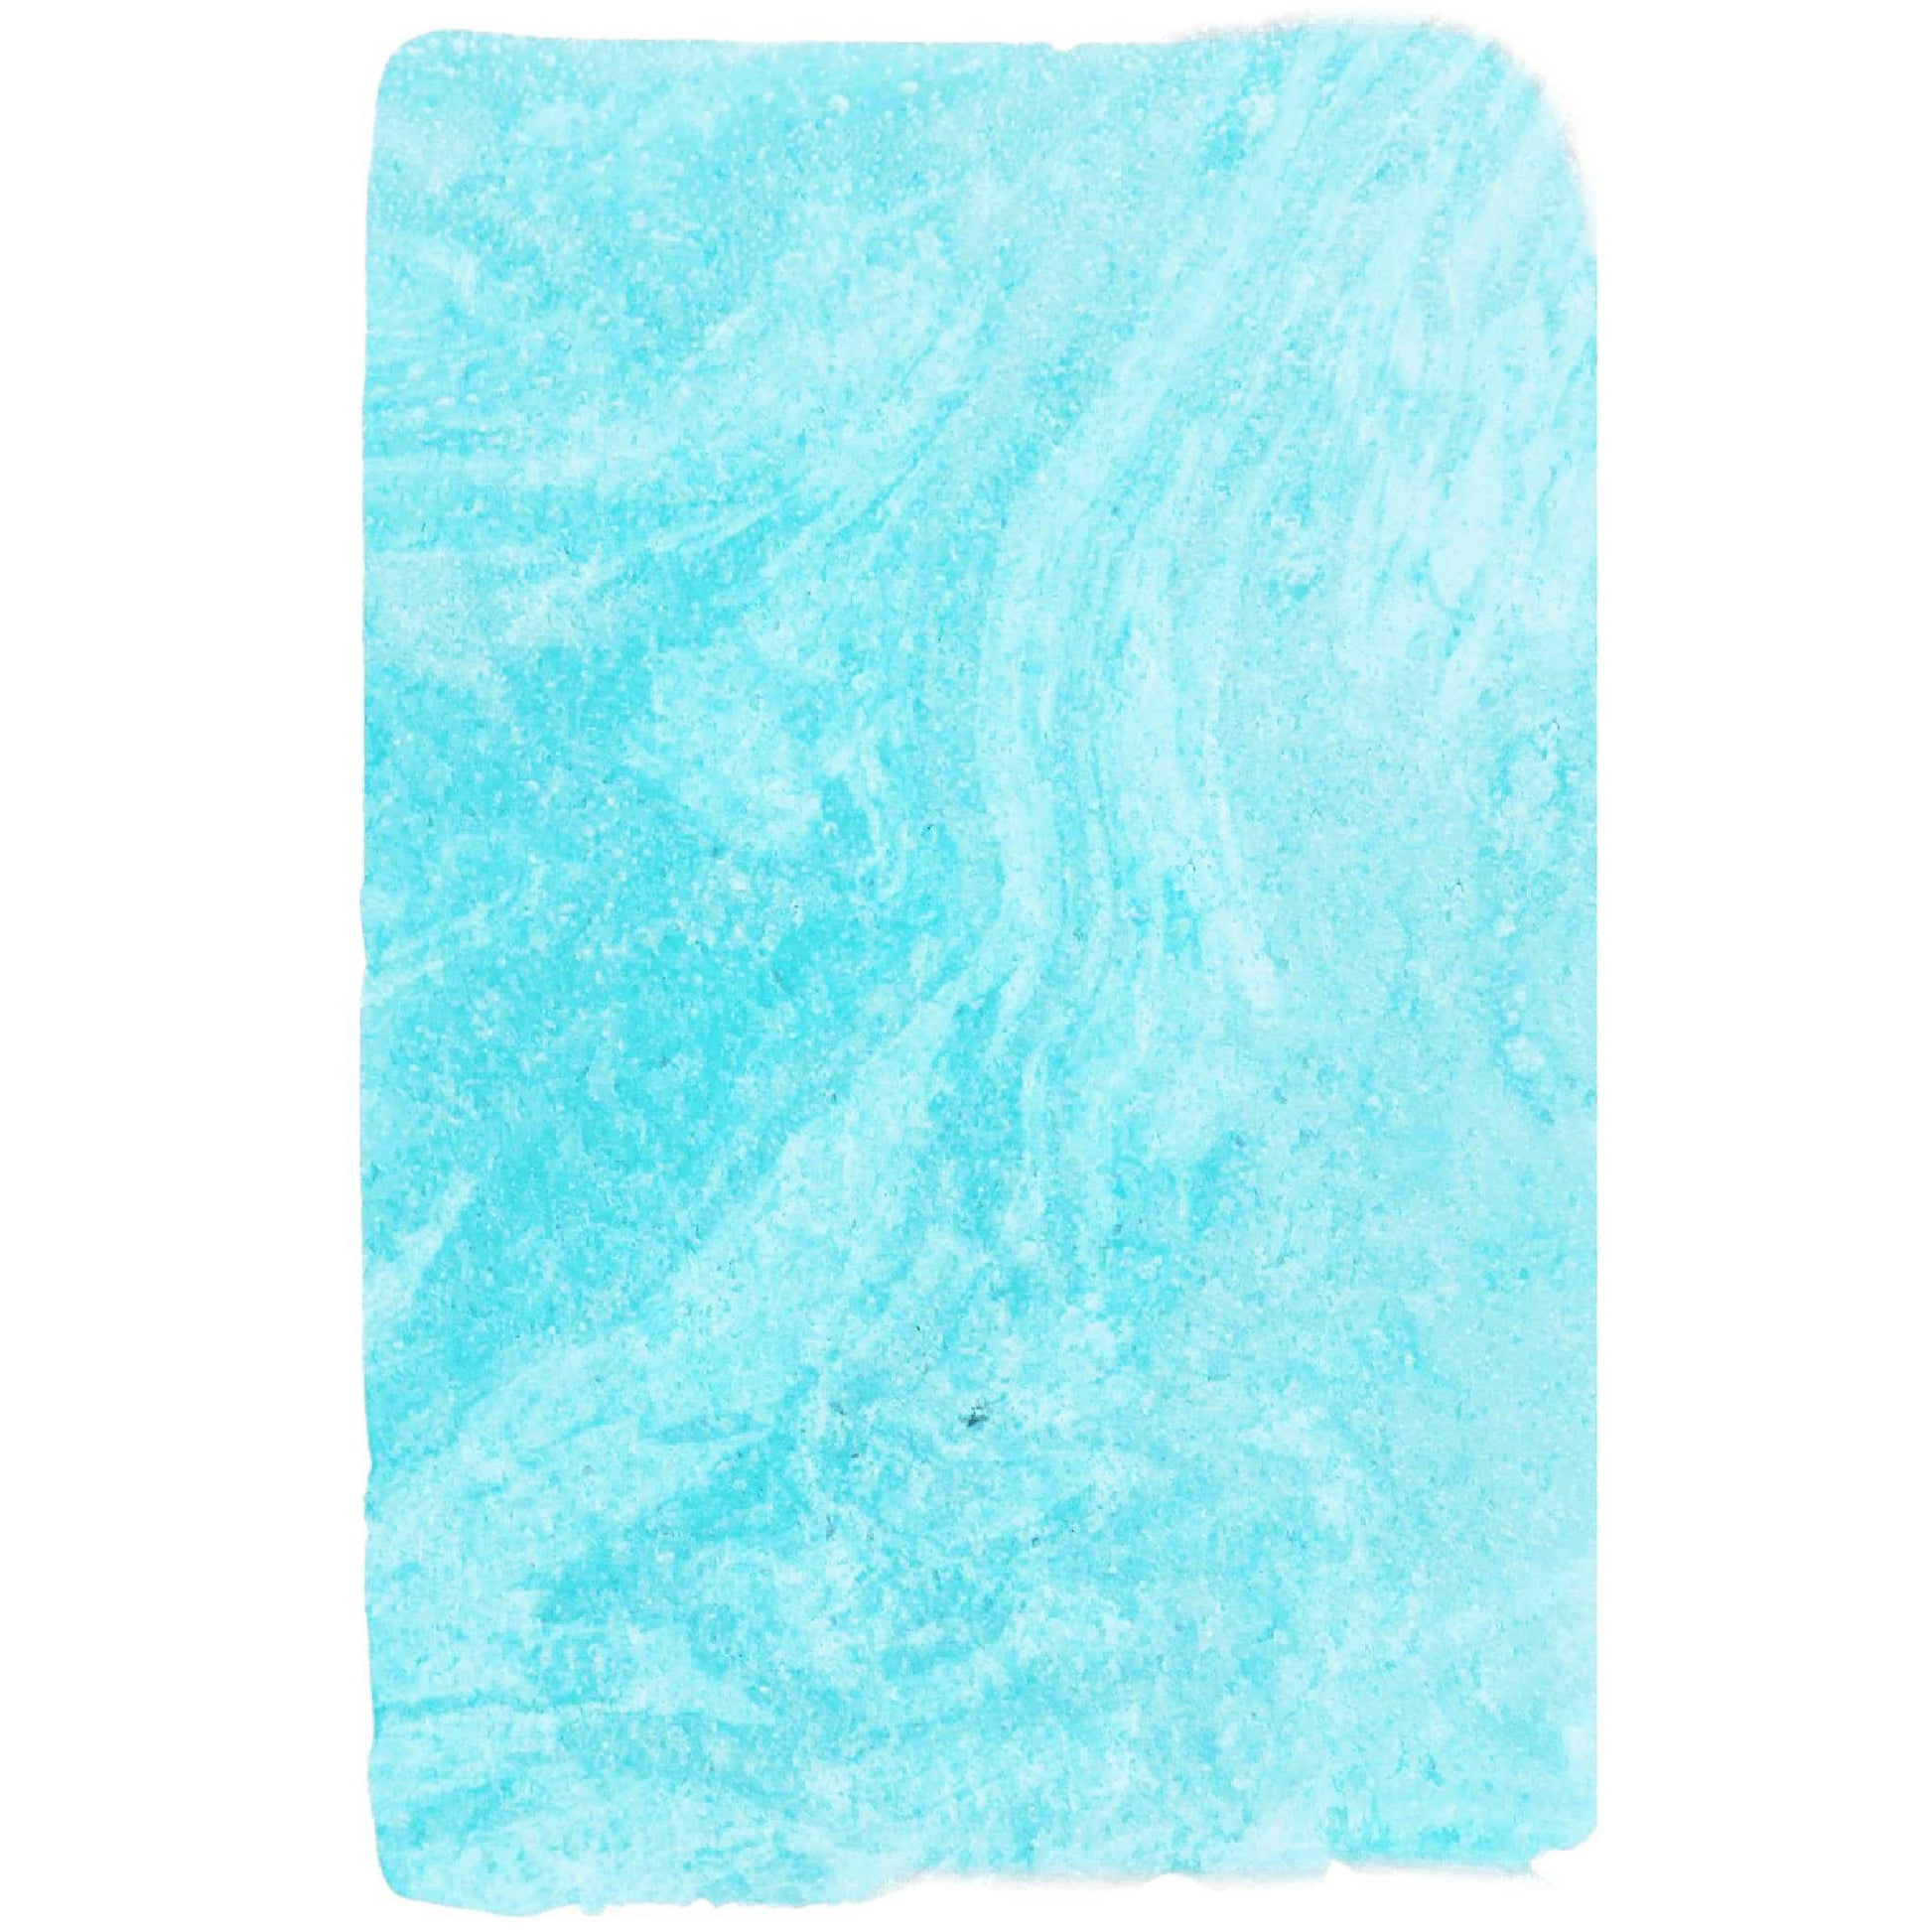 Discover Neptune's Daughter Sugar Scrub Bar! Our natural, exfoliating bar leaves skin feeling wonderfully refreshed.